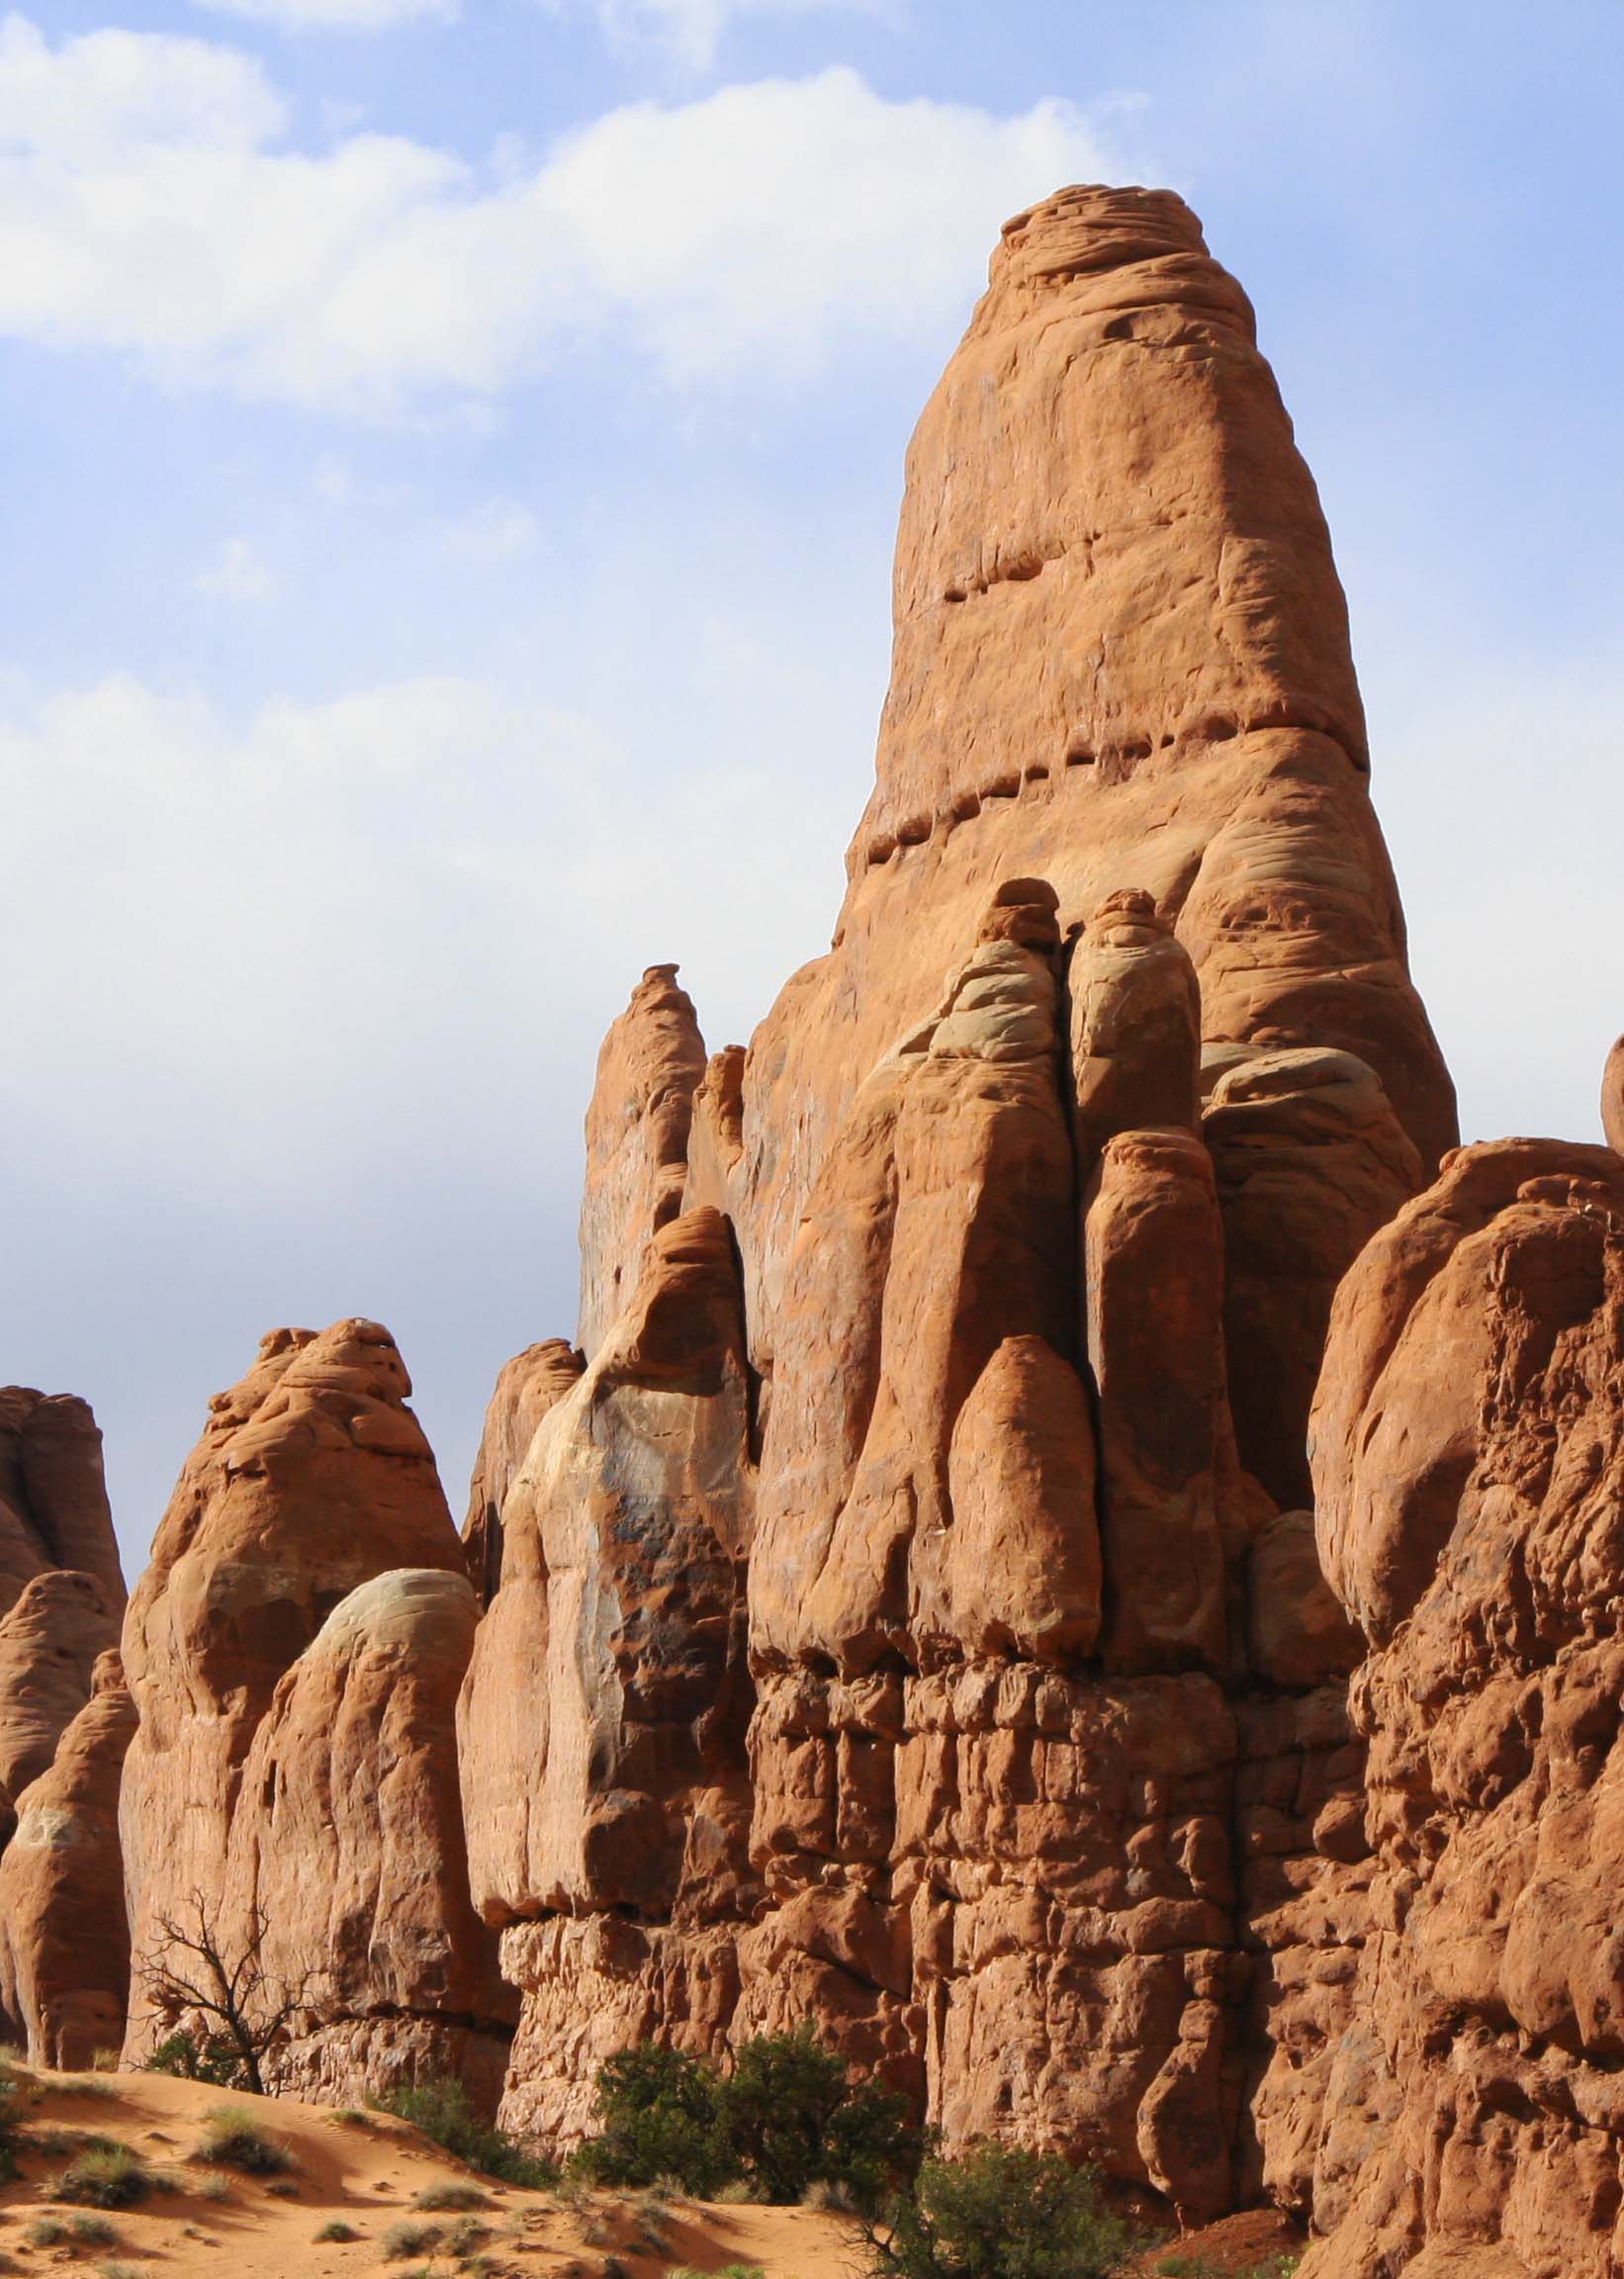 Family of rock sculptures at Arches National Park. Photo by Curtis Mekemson.